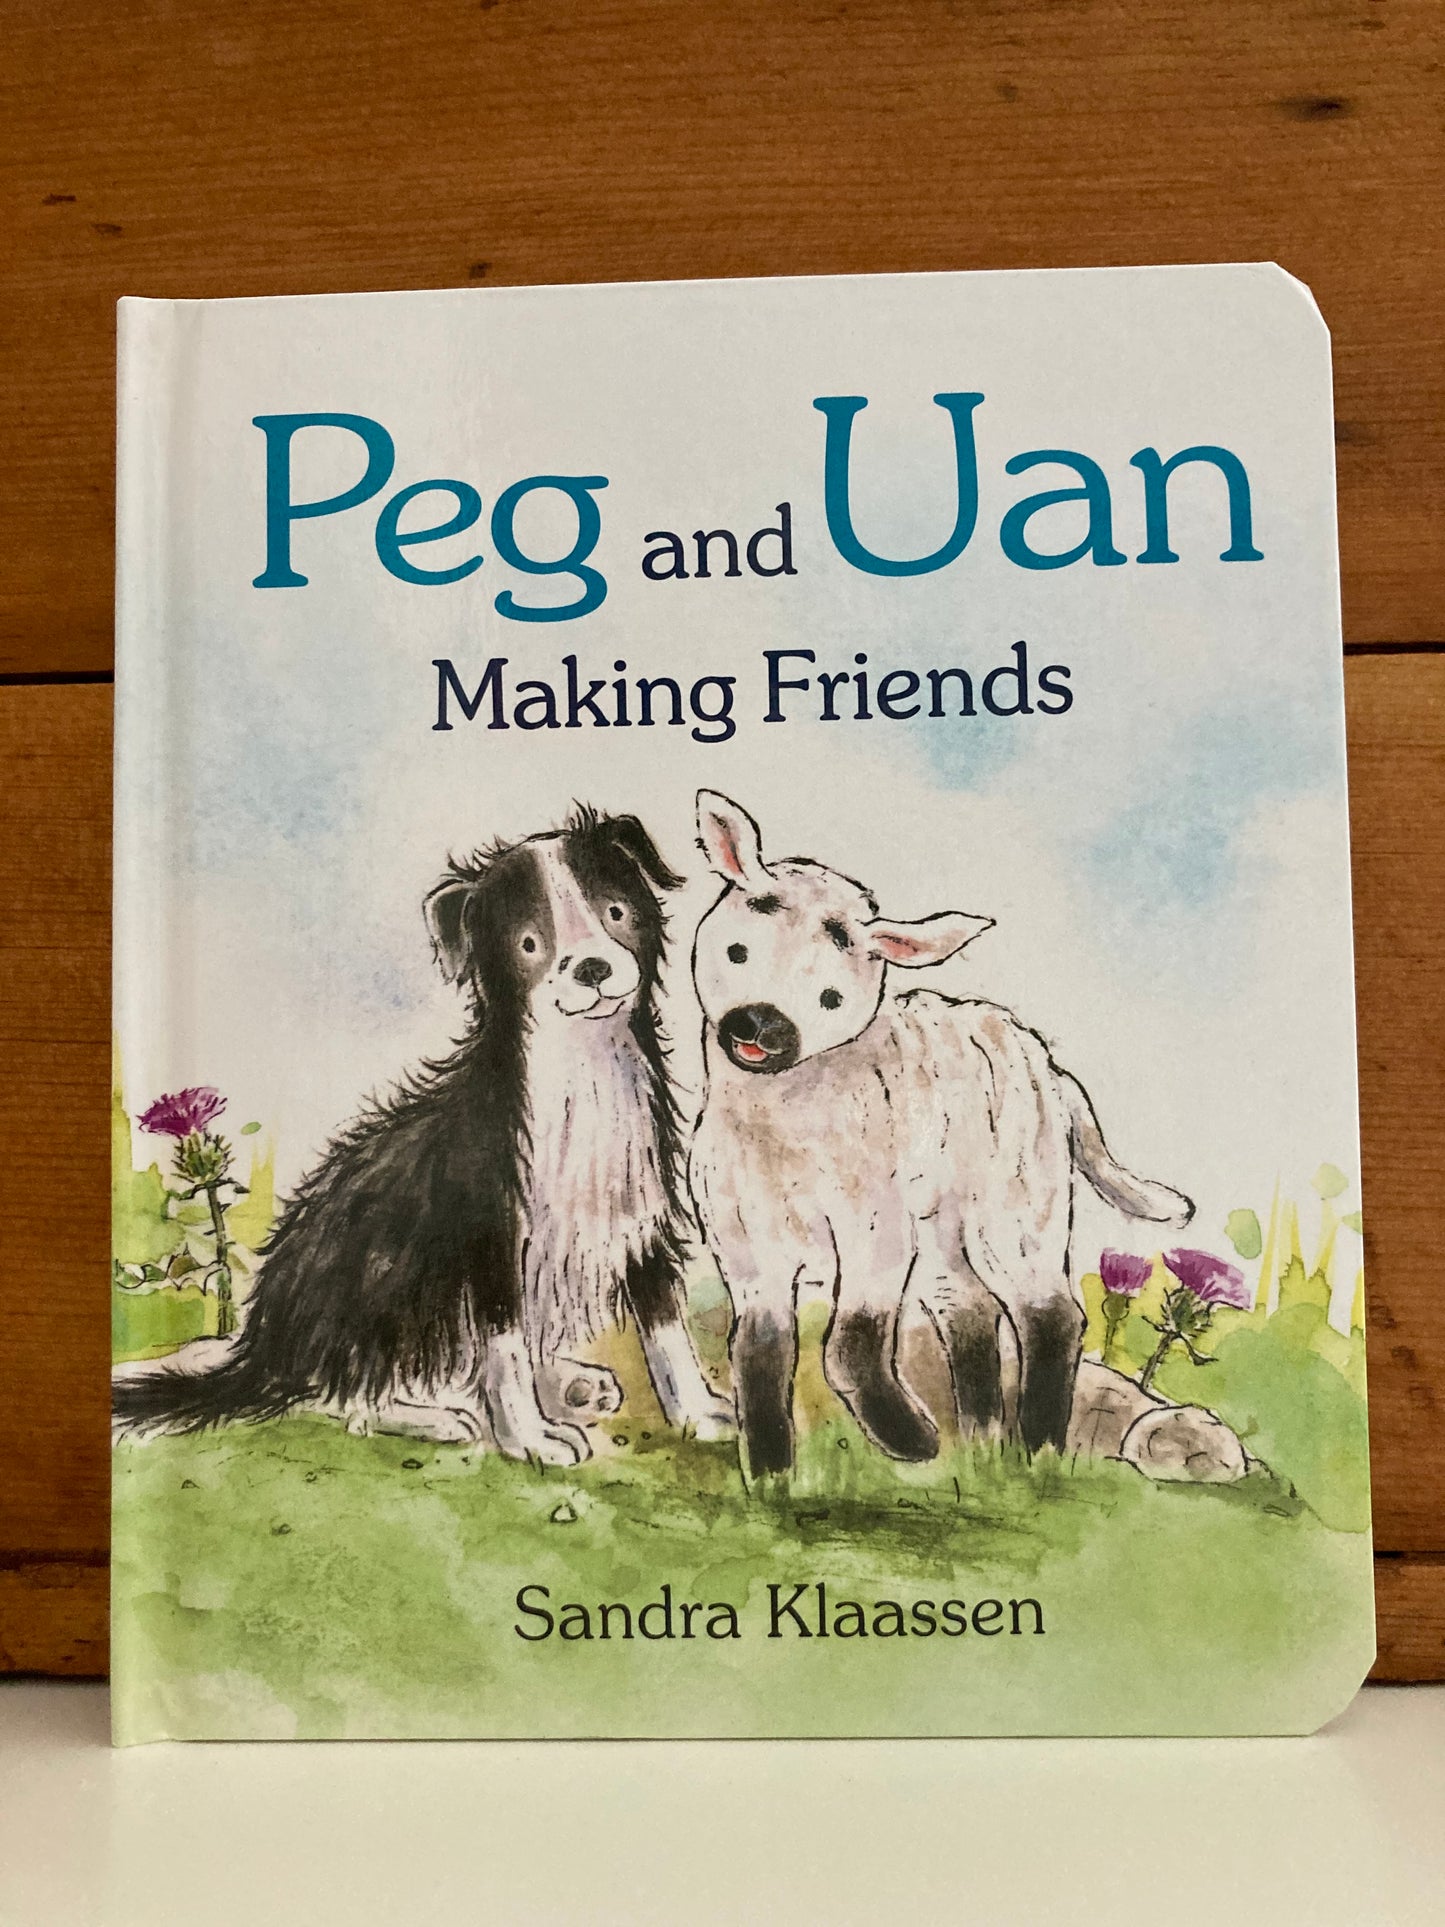 Board Book, Baby - PEG and UAN, MAKING FRIENDS